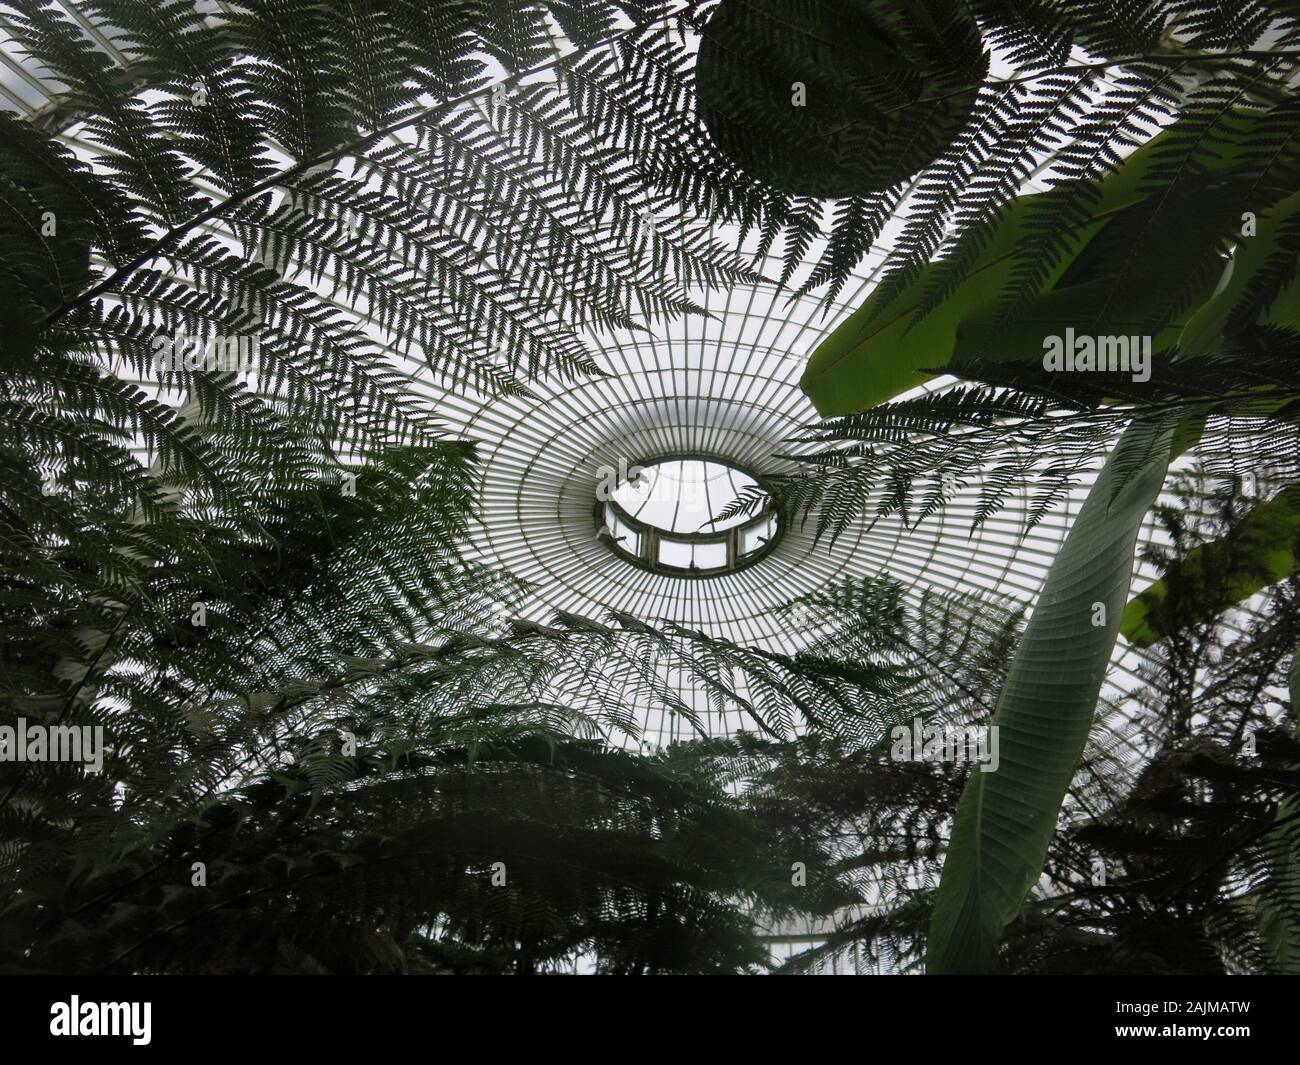 Striking lacy pattern of fronds of tree ferns silhouetted against the wrought iron and glass dome of the Kibble Palace at Glasgow Botanic Gardens. Stock Photo